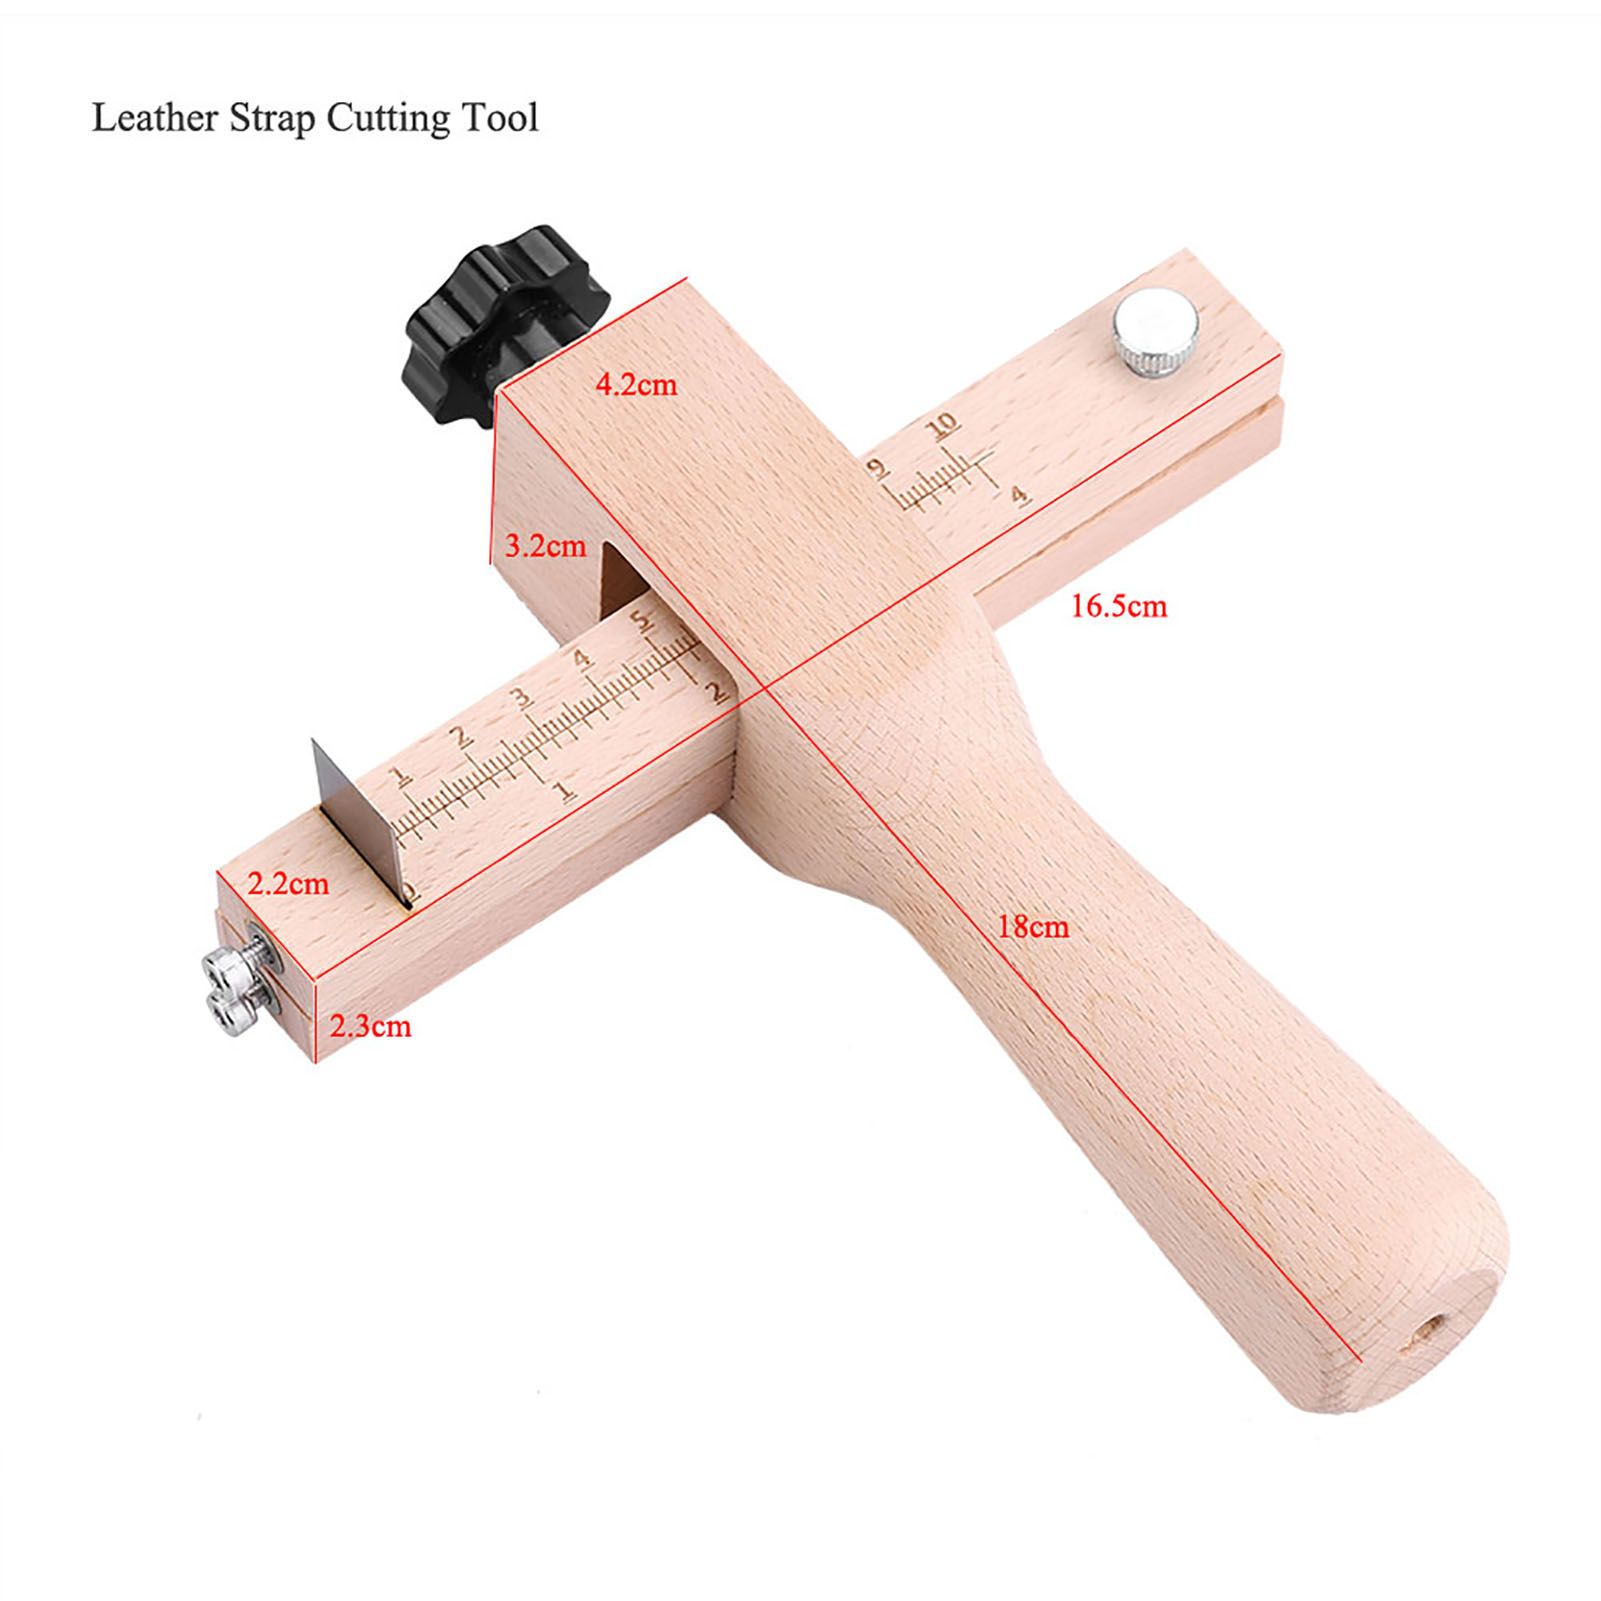 Leather Cutting Tool Leather Strap Cutter with Wooden Handle